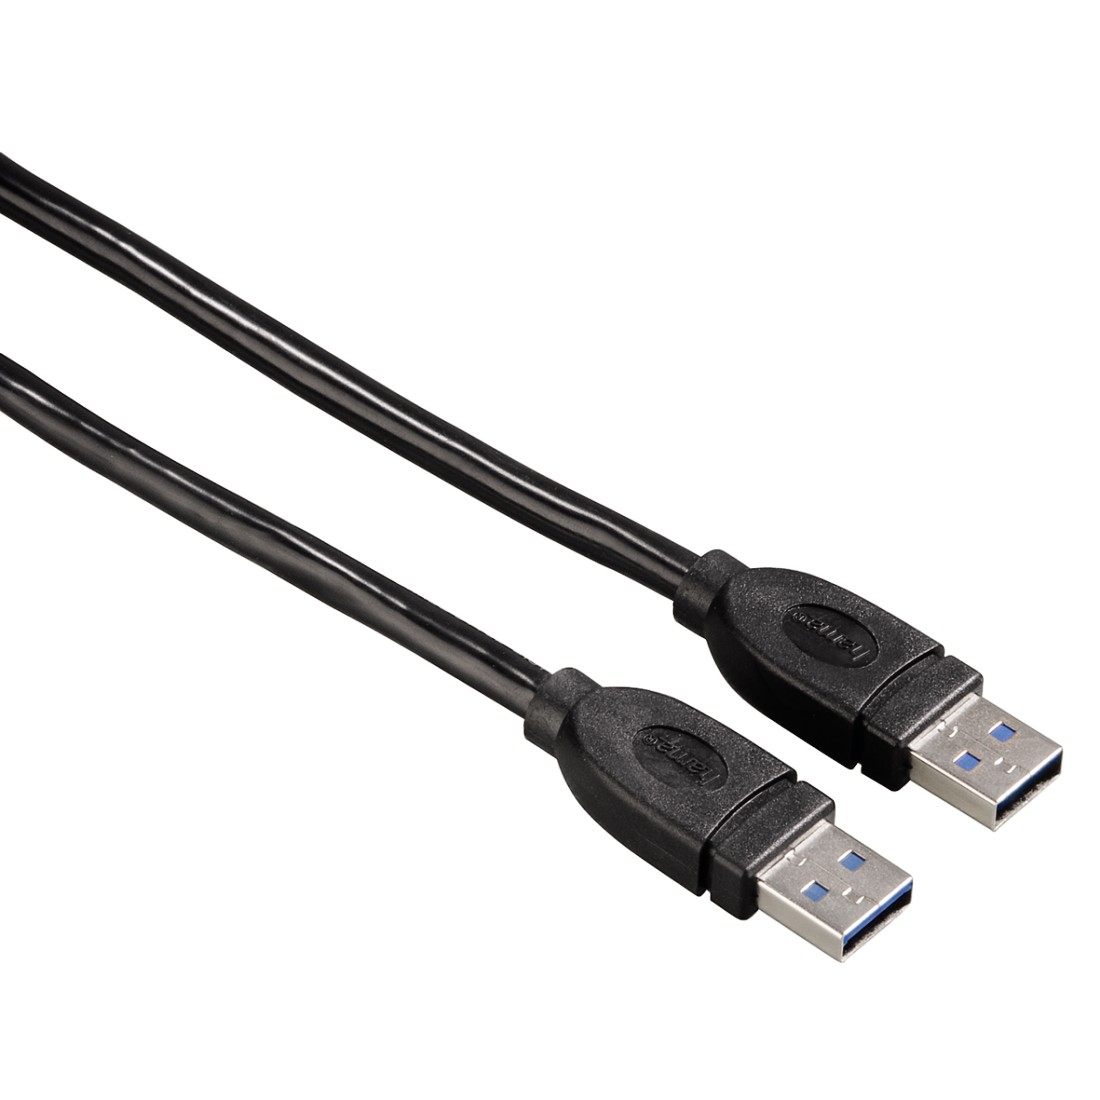 Hama USB 3.0 Cable (A-A), shielded, 1.80 m